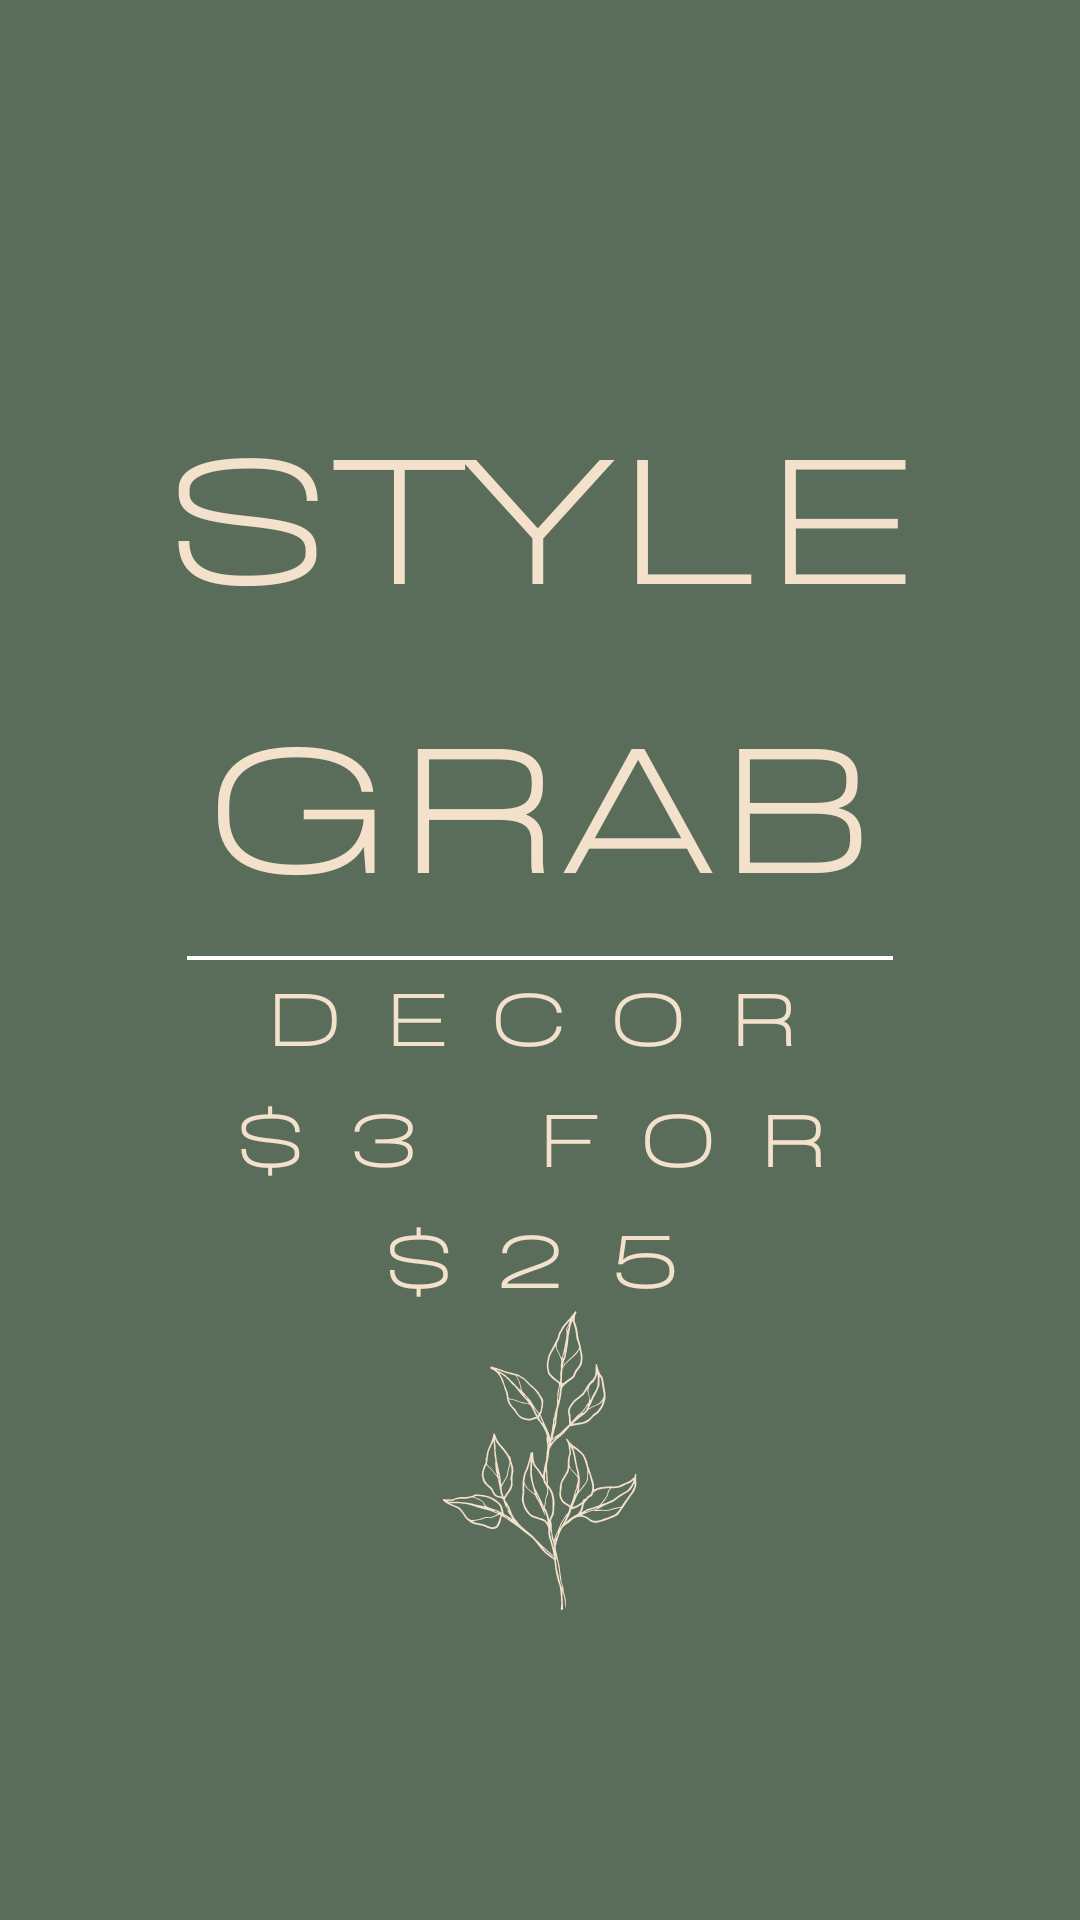 [Style Grab] Decor- 3 for $25